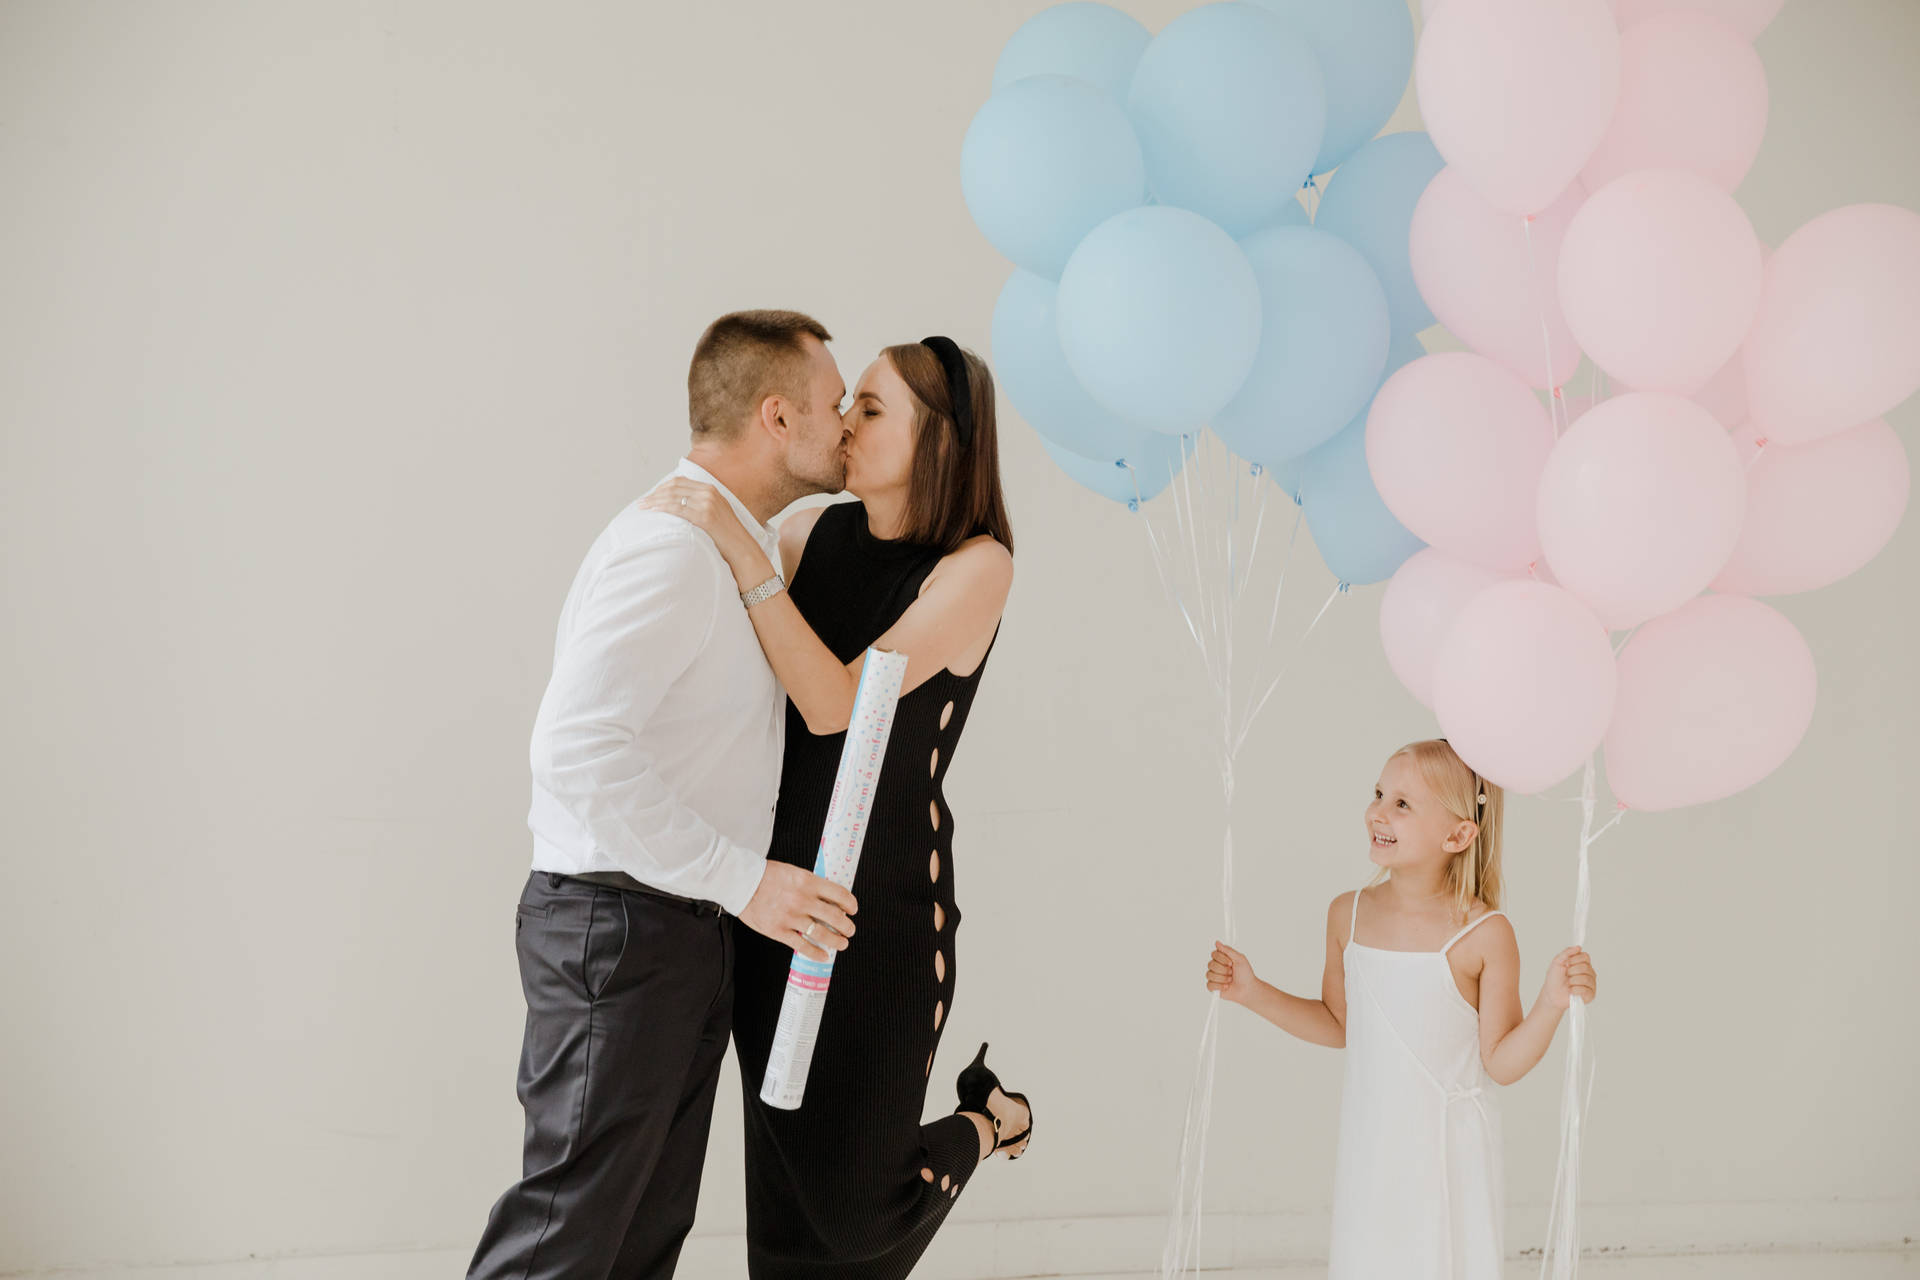 Family Photoshoot With Balloons Background